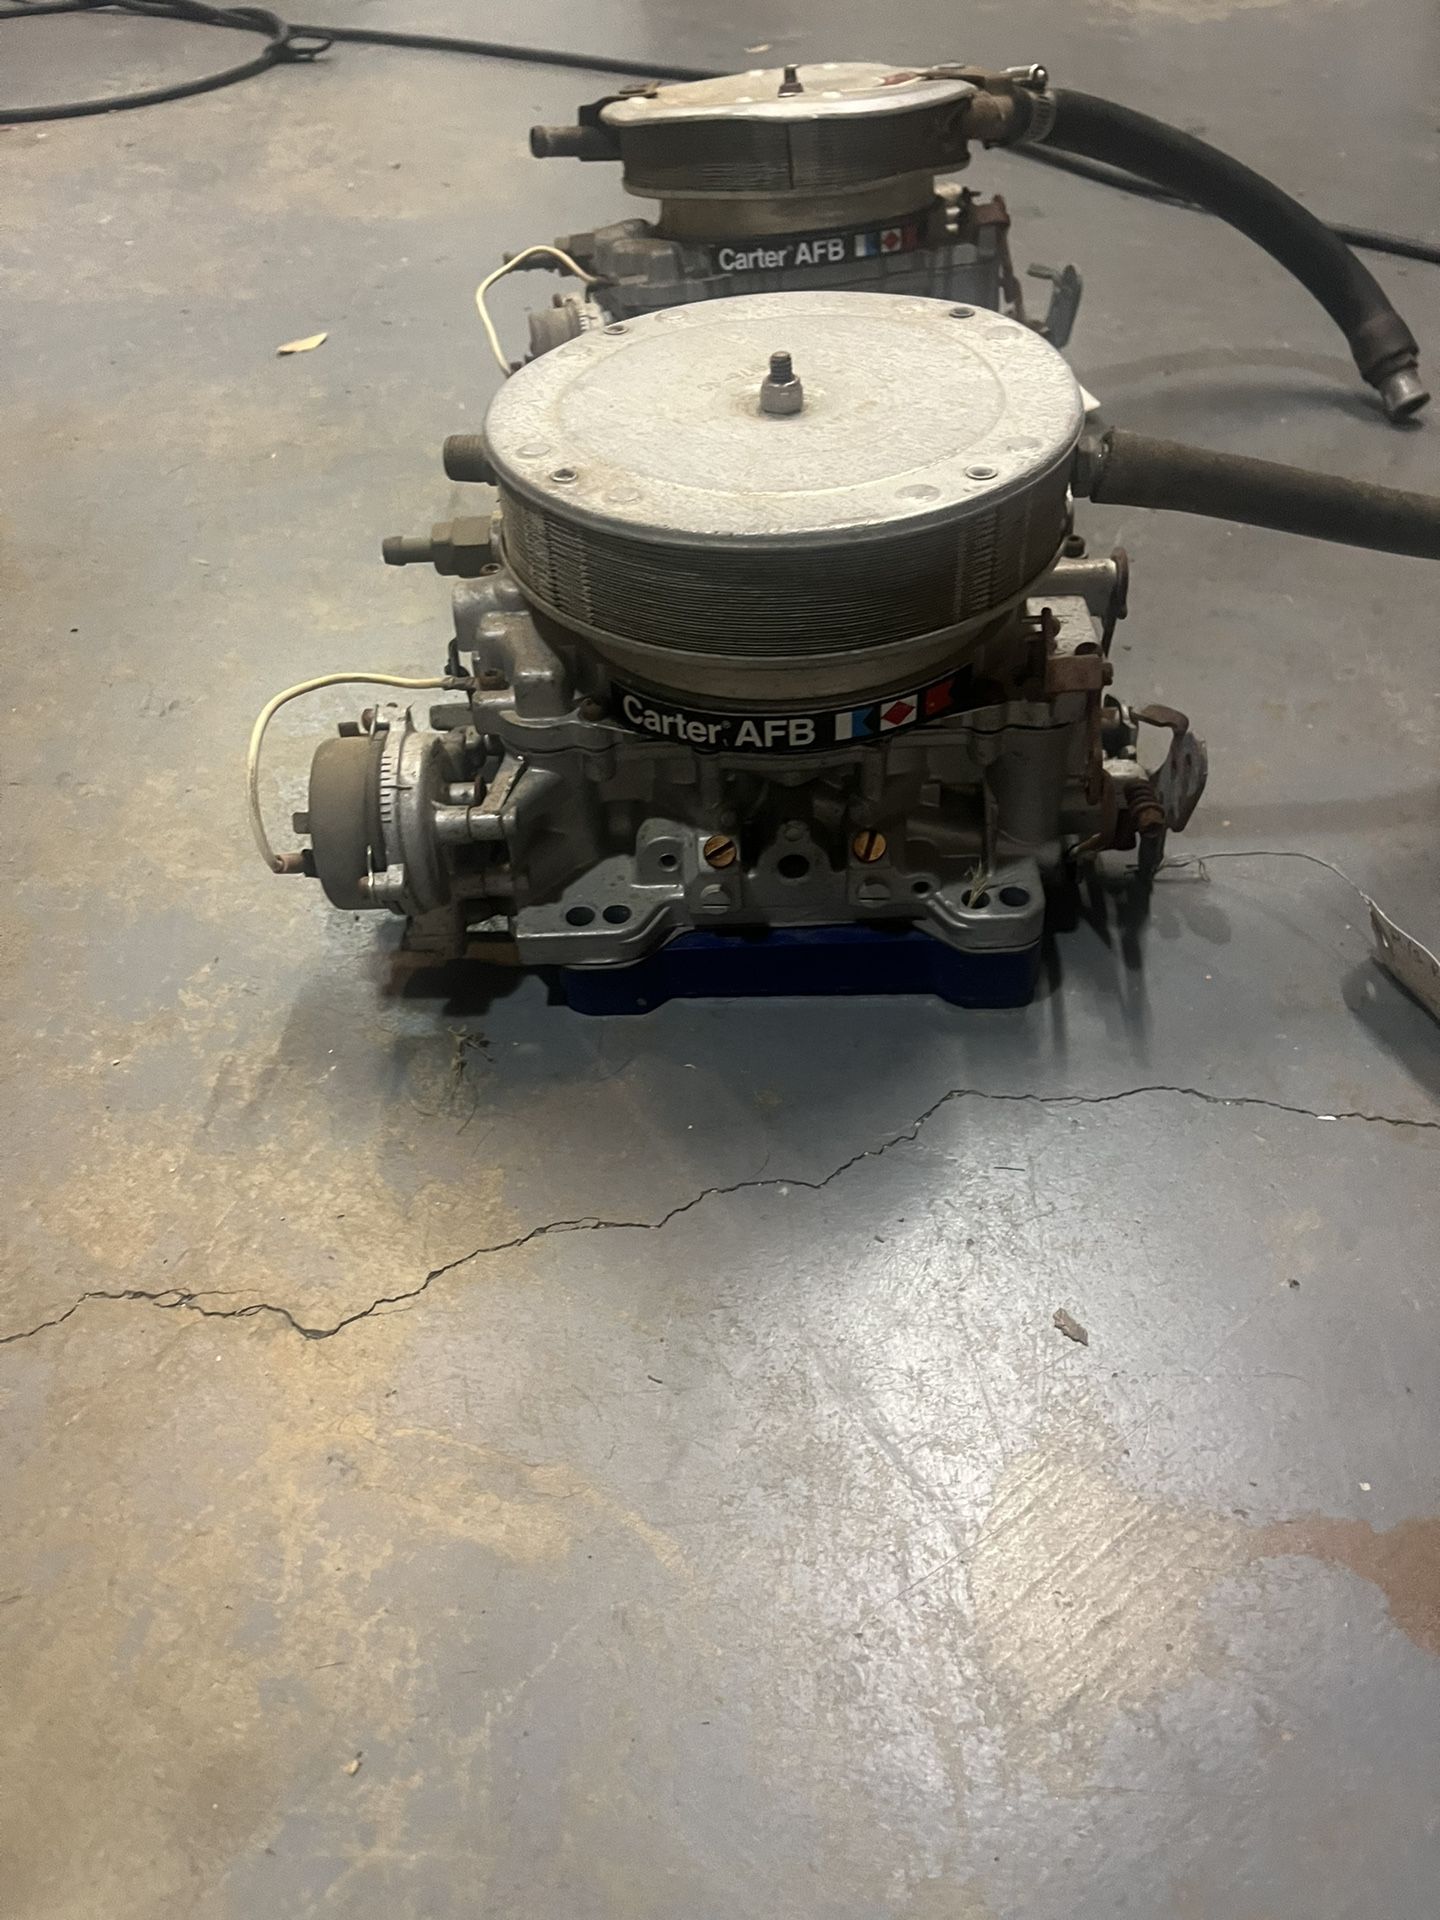 350 Small Block Chevy Marine Carb 